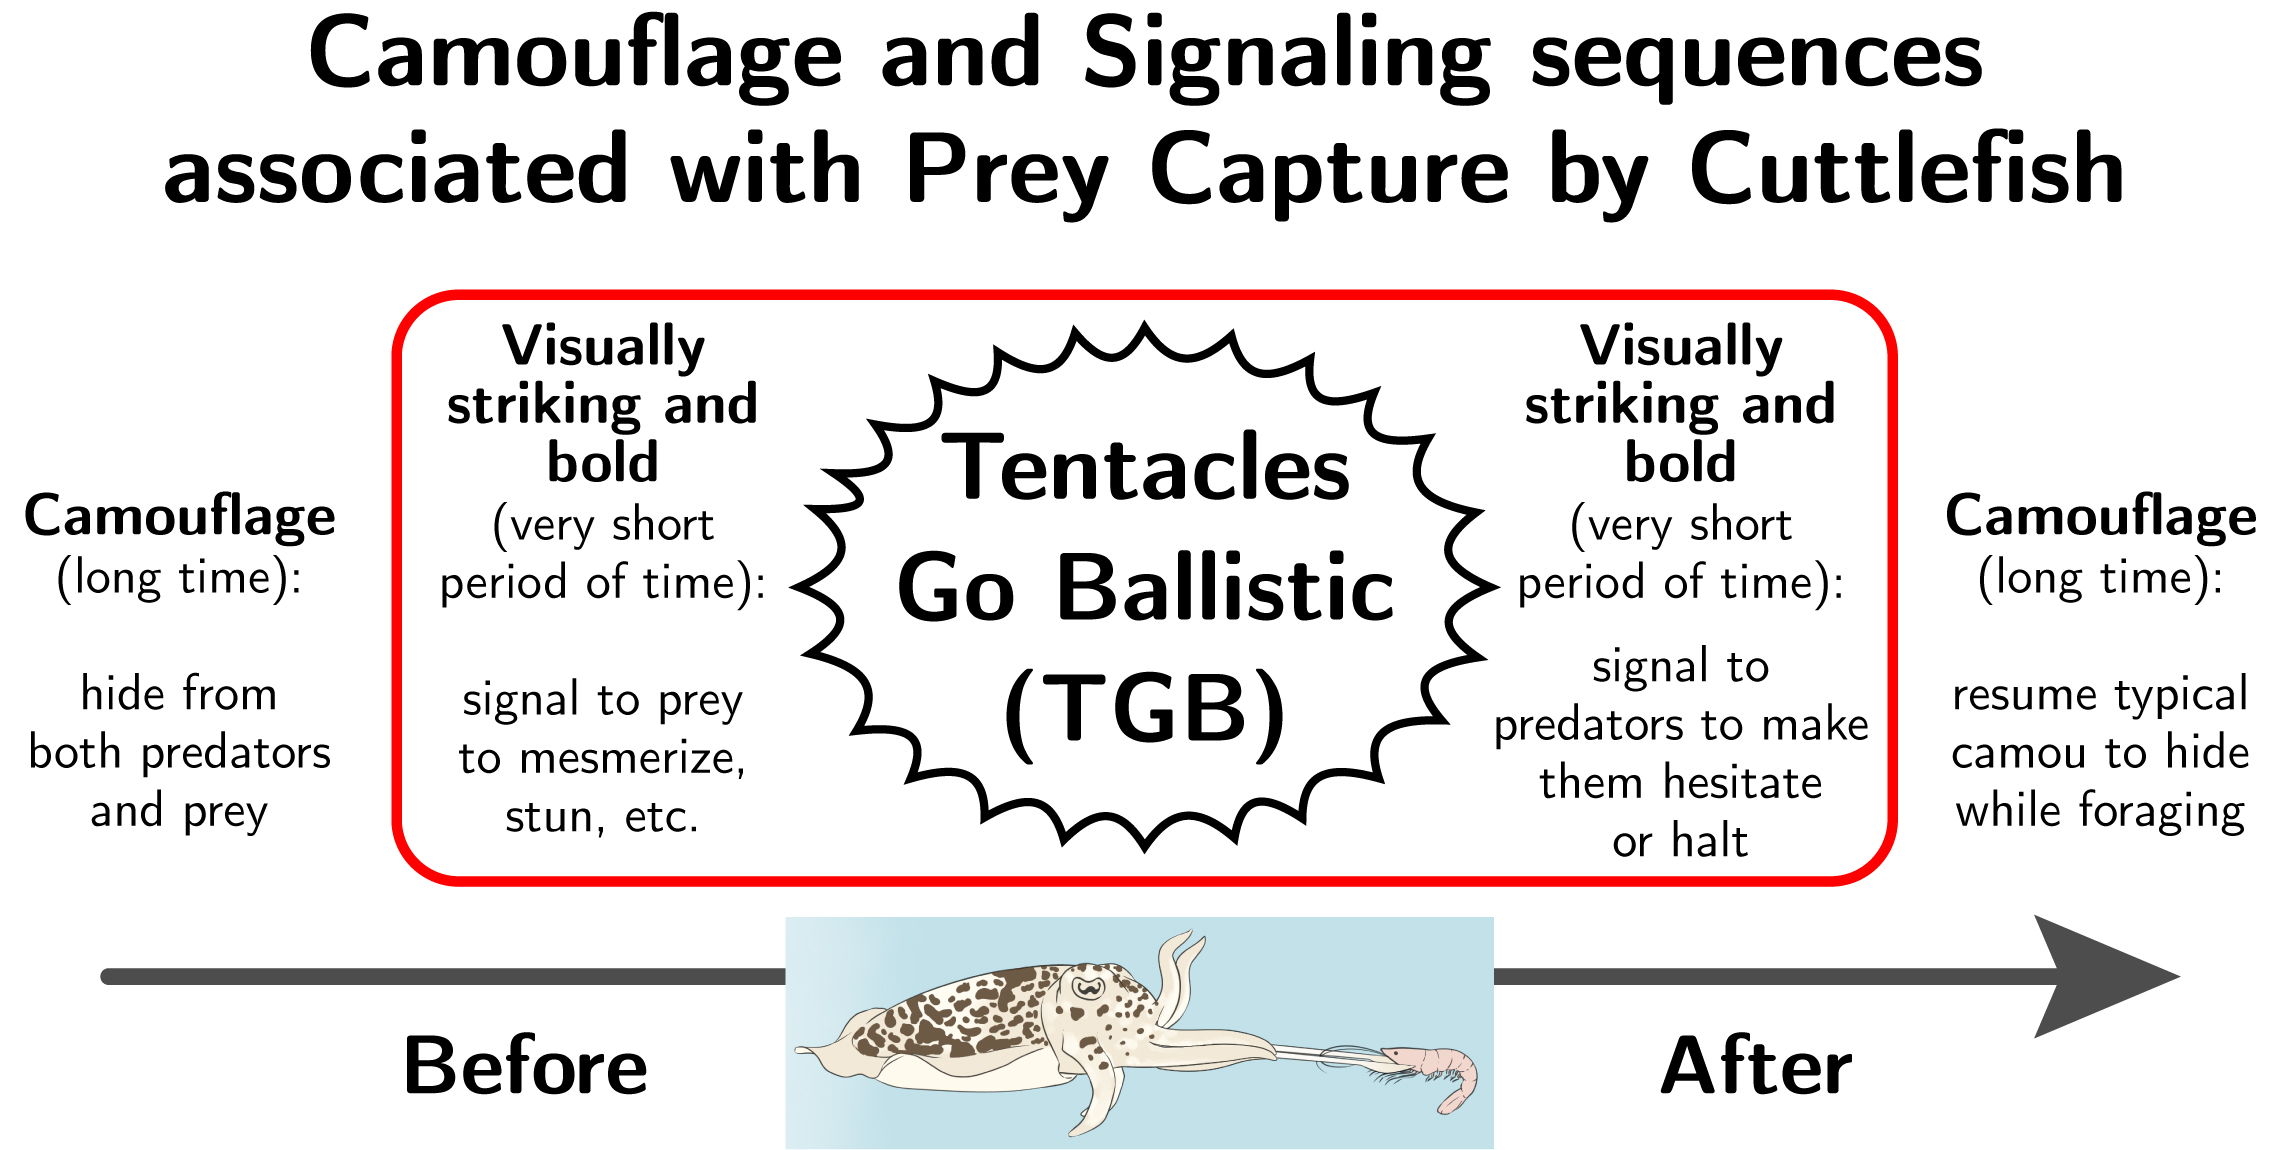 Camouflage and signaling sequences associated with prey capture by cuttlefish